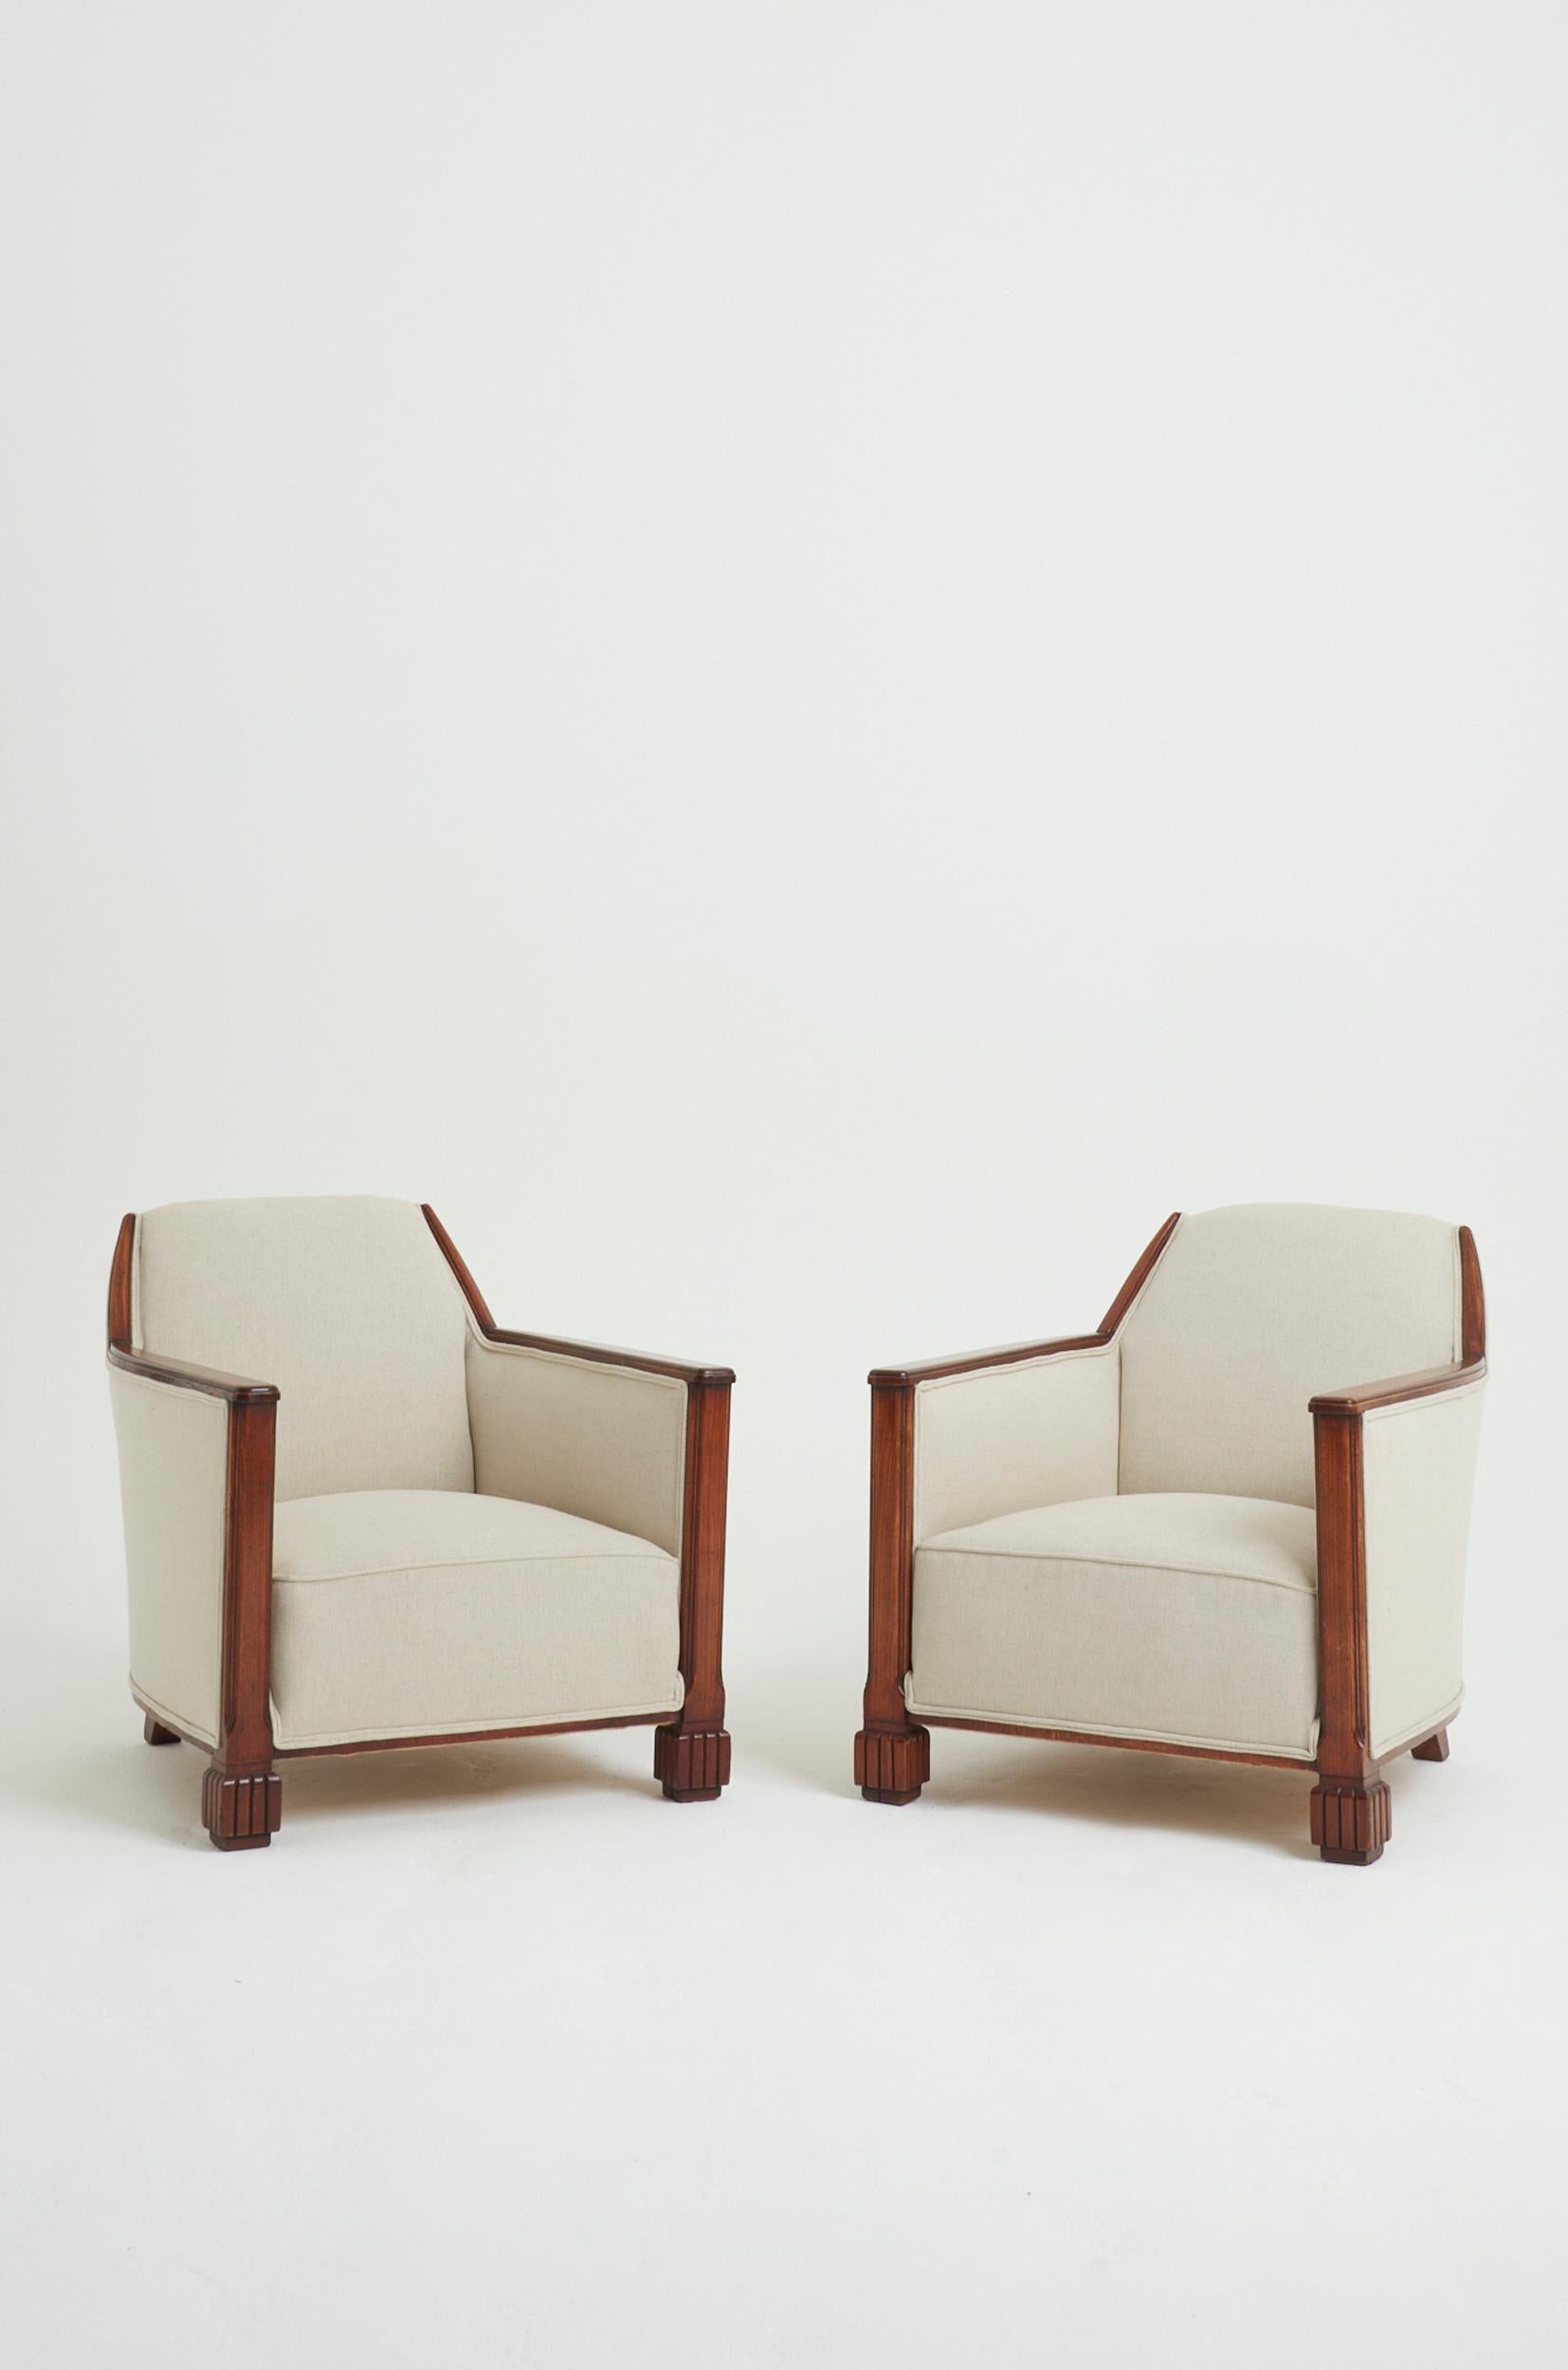 A pair of Art Deco oak armchairs
France, 1930s
71 cm high by 65 cm wide by 82.5 cm depth, seat height 35 cm